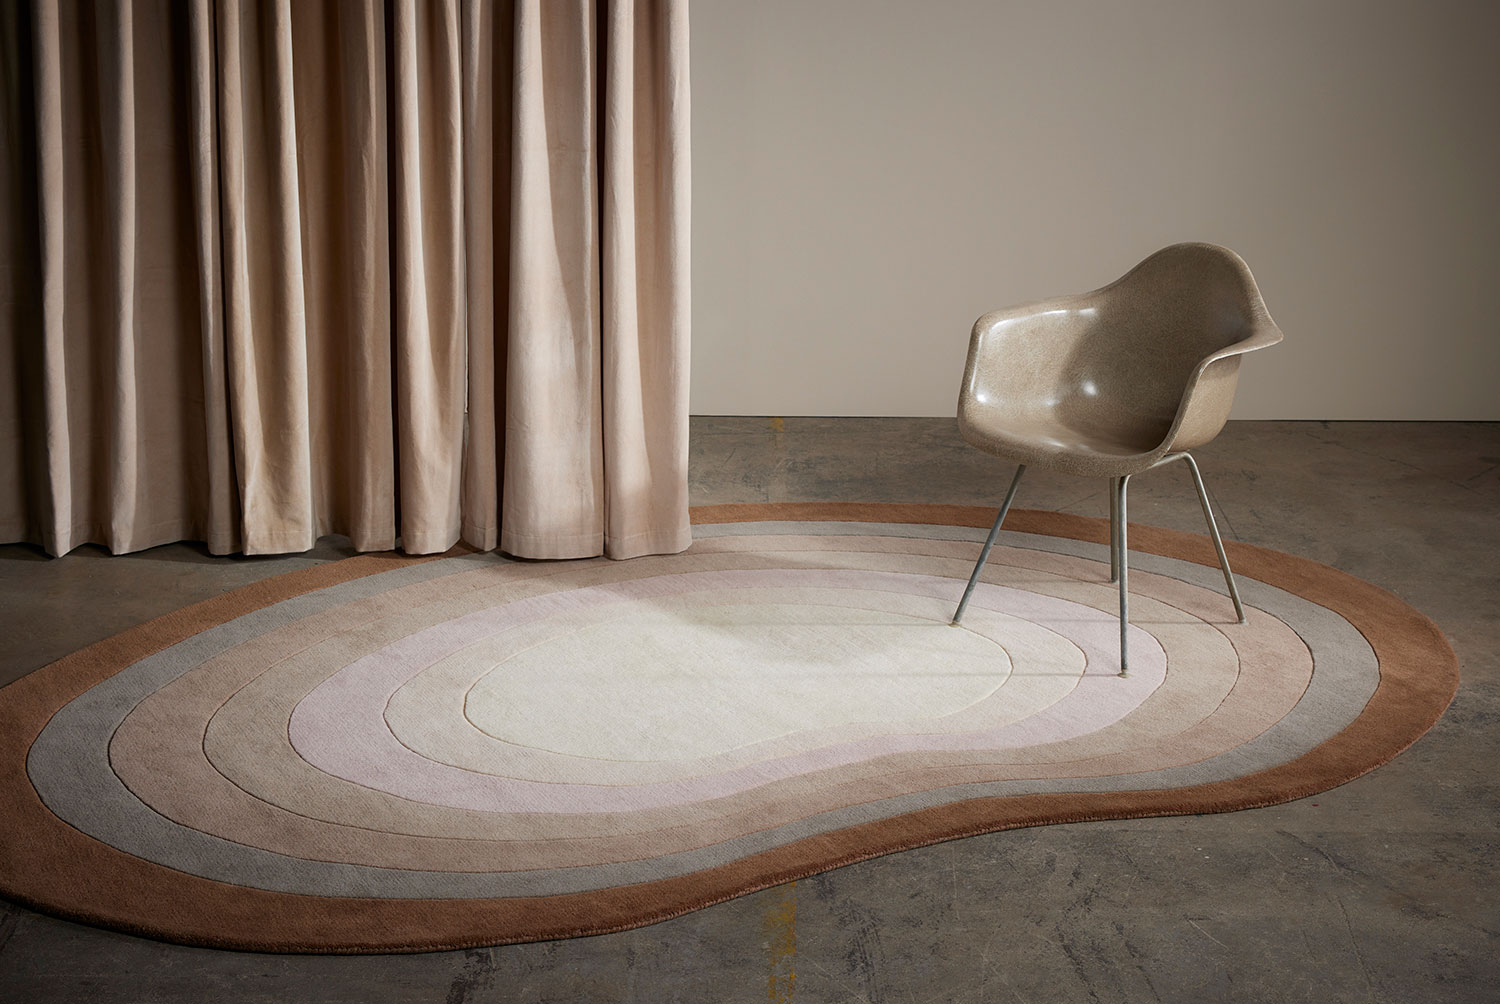 A modern chair sits on a neutral gradient area rug called Pool Heaven in the shape of a pool